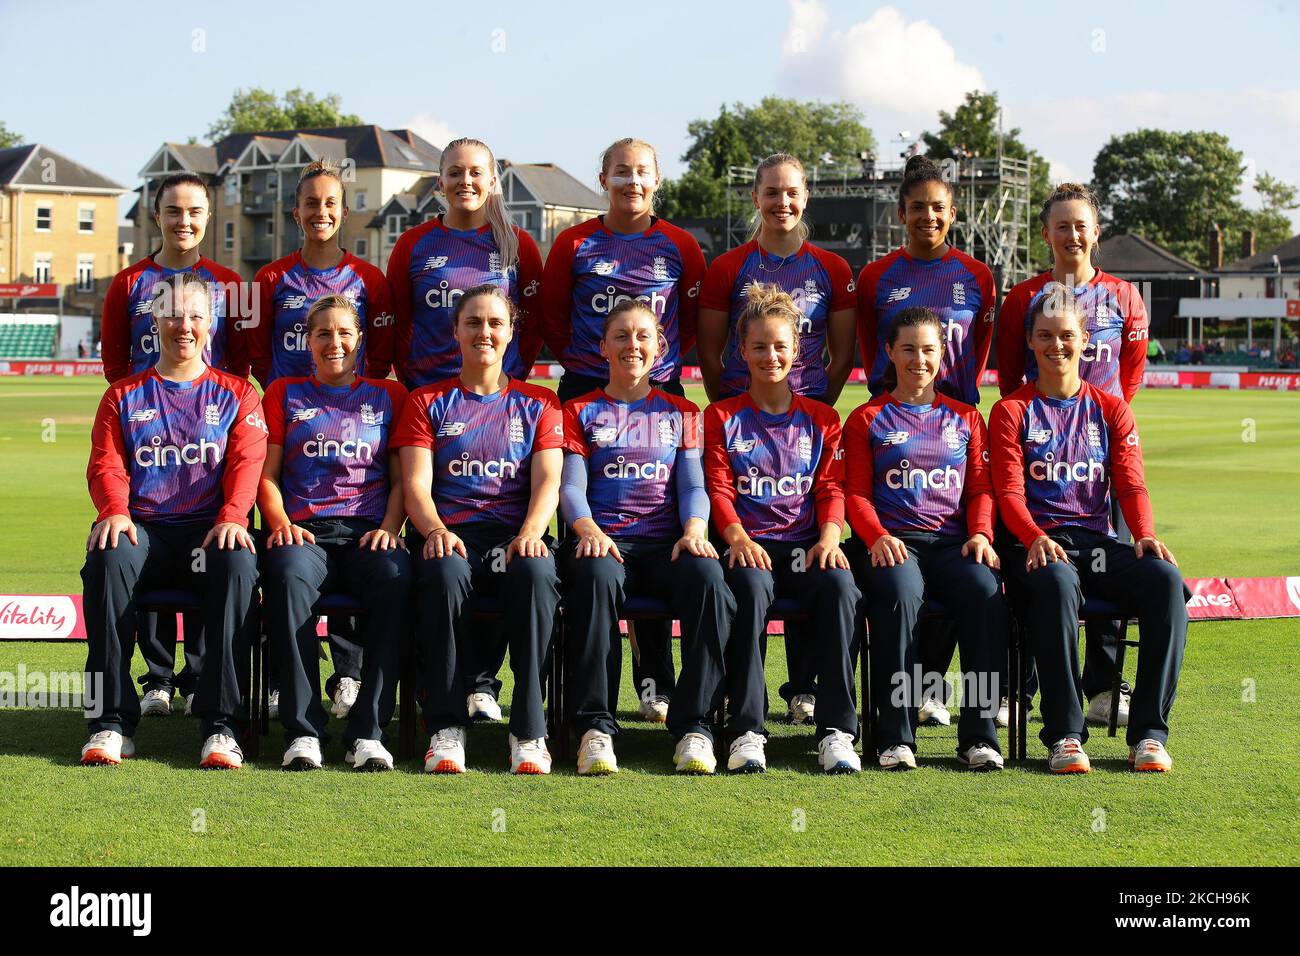 (left to right, back to front row) Mady Villiers, Tash Farrant, Sarah Glenn, Sophie Ecclestone, Freya Davies, Sophia Dunkley, Fran Wilson, Anya Shrubsole, Katherine Brunt, Natalie Sciver, Heather Knight, Danni Wyatt, Tammy Beaumont, and Amy Jones poses for photographers prior to the start of the third Vitality IT / 20 between England Women and India Women at The Cloudfm County Ground, Chelmsford, on 14th July 2021 (Photo by Action Foto Sport/NurPhoto) Stock Photo